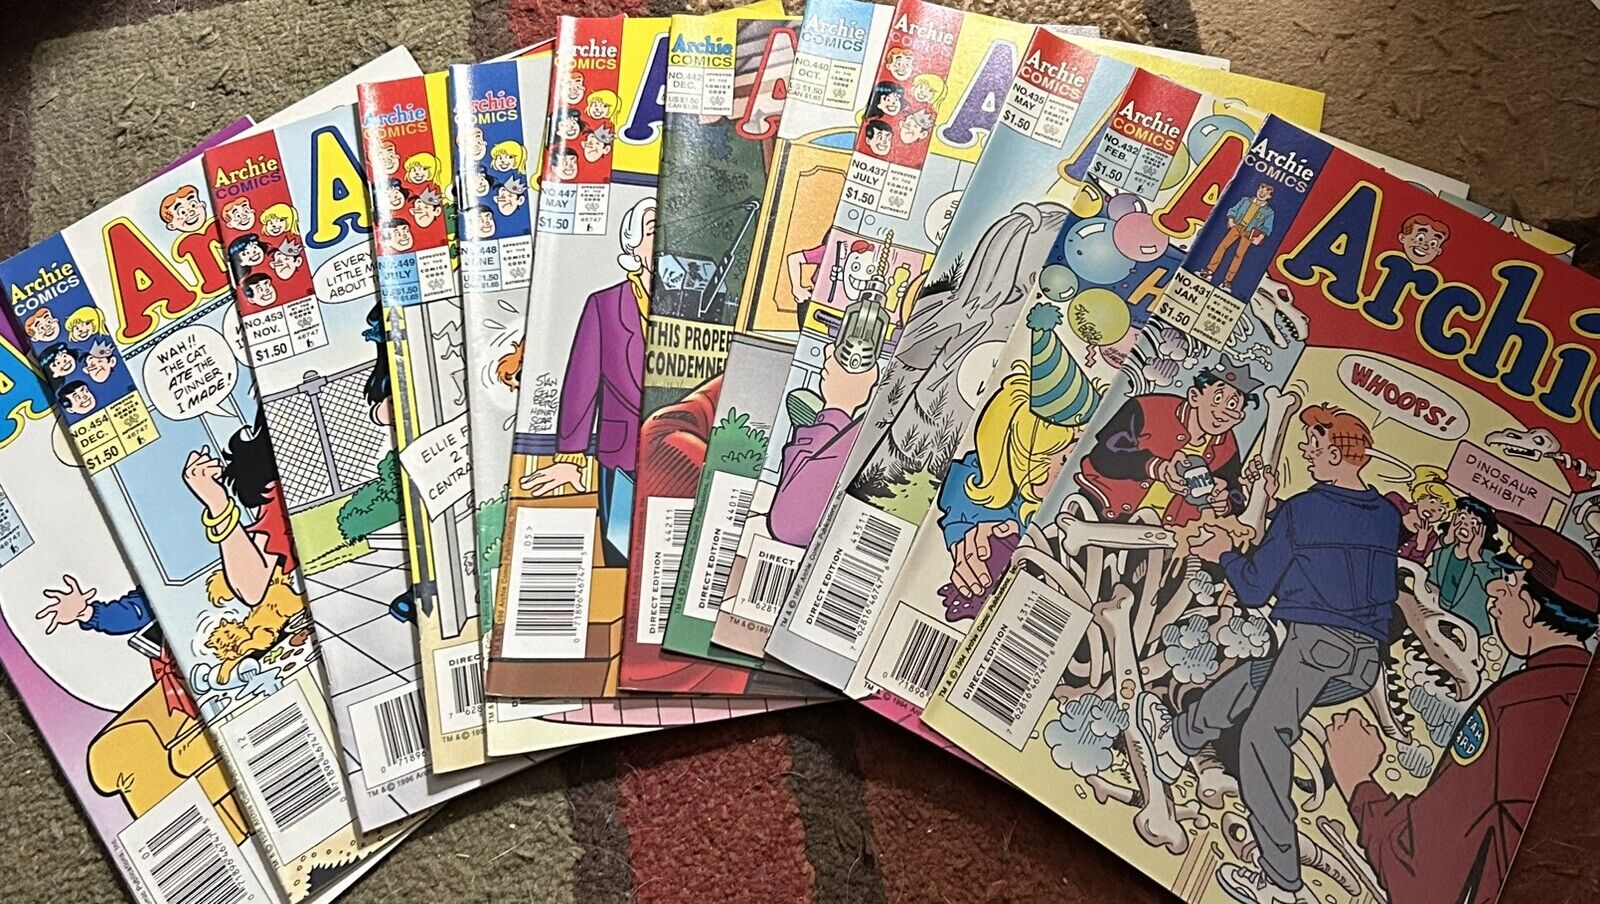 Archie 431 432 435 437 440 442 447 448 449 453 454 455 (12 Issues) FN- To VF+